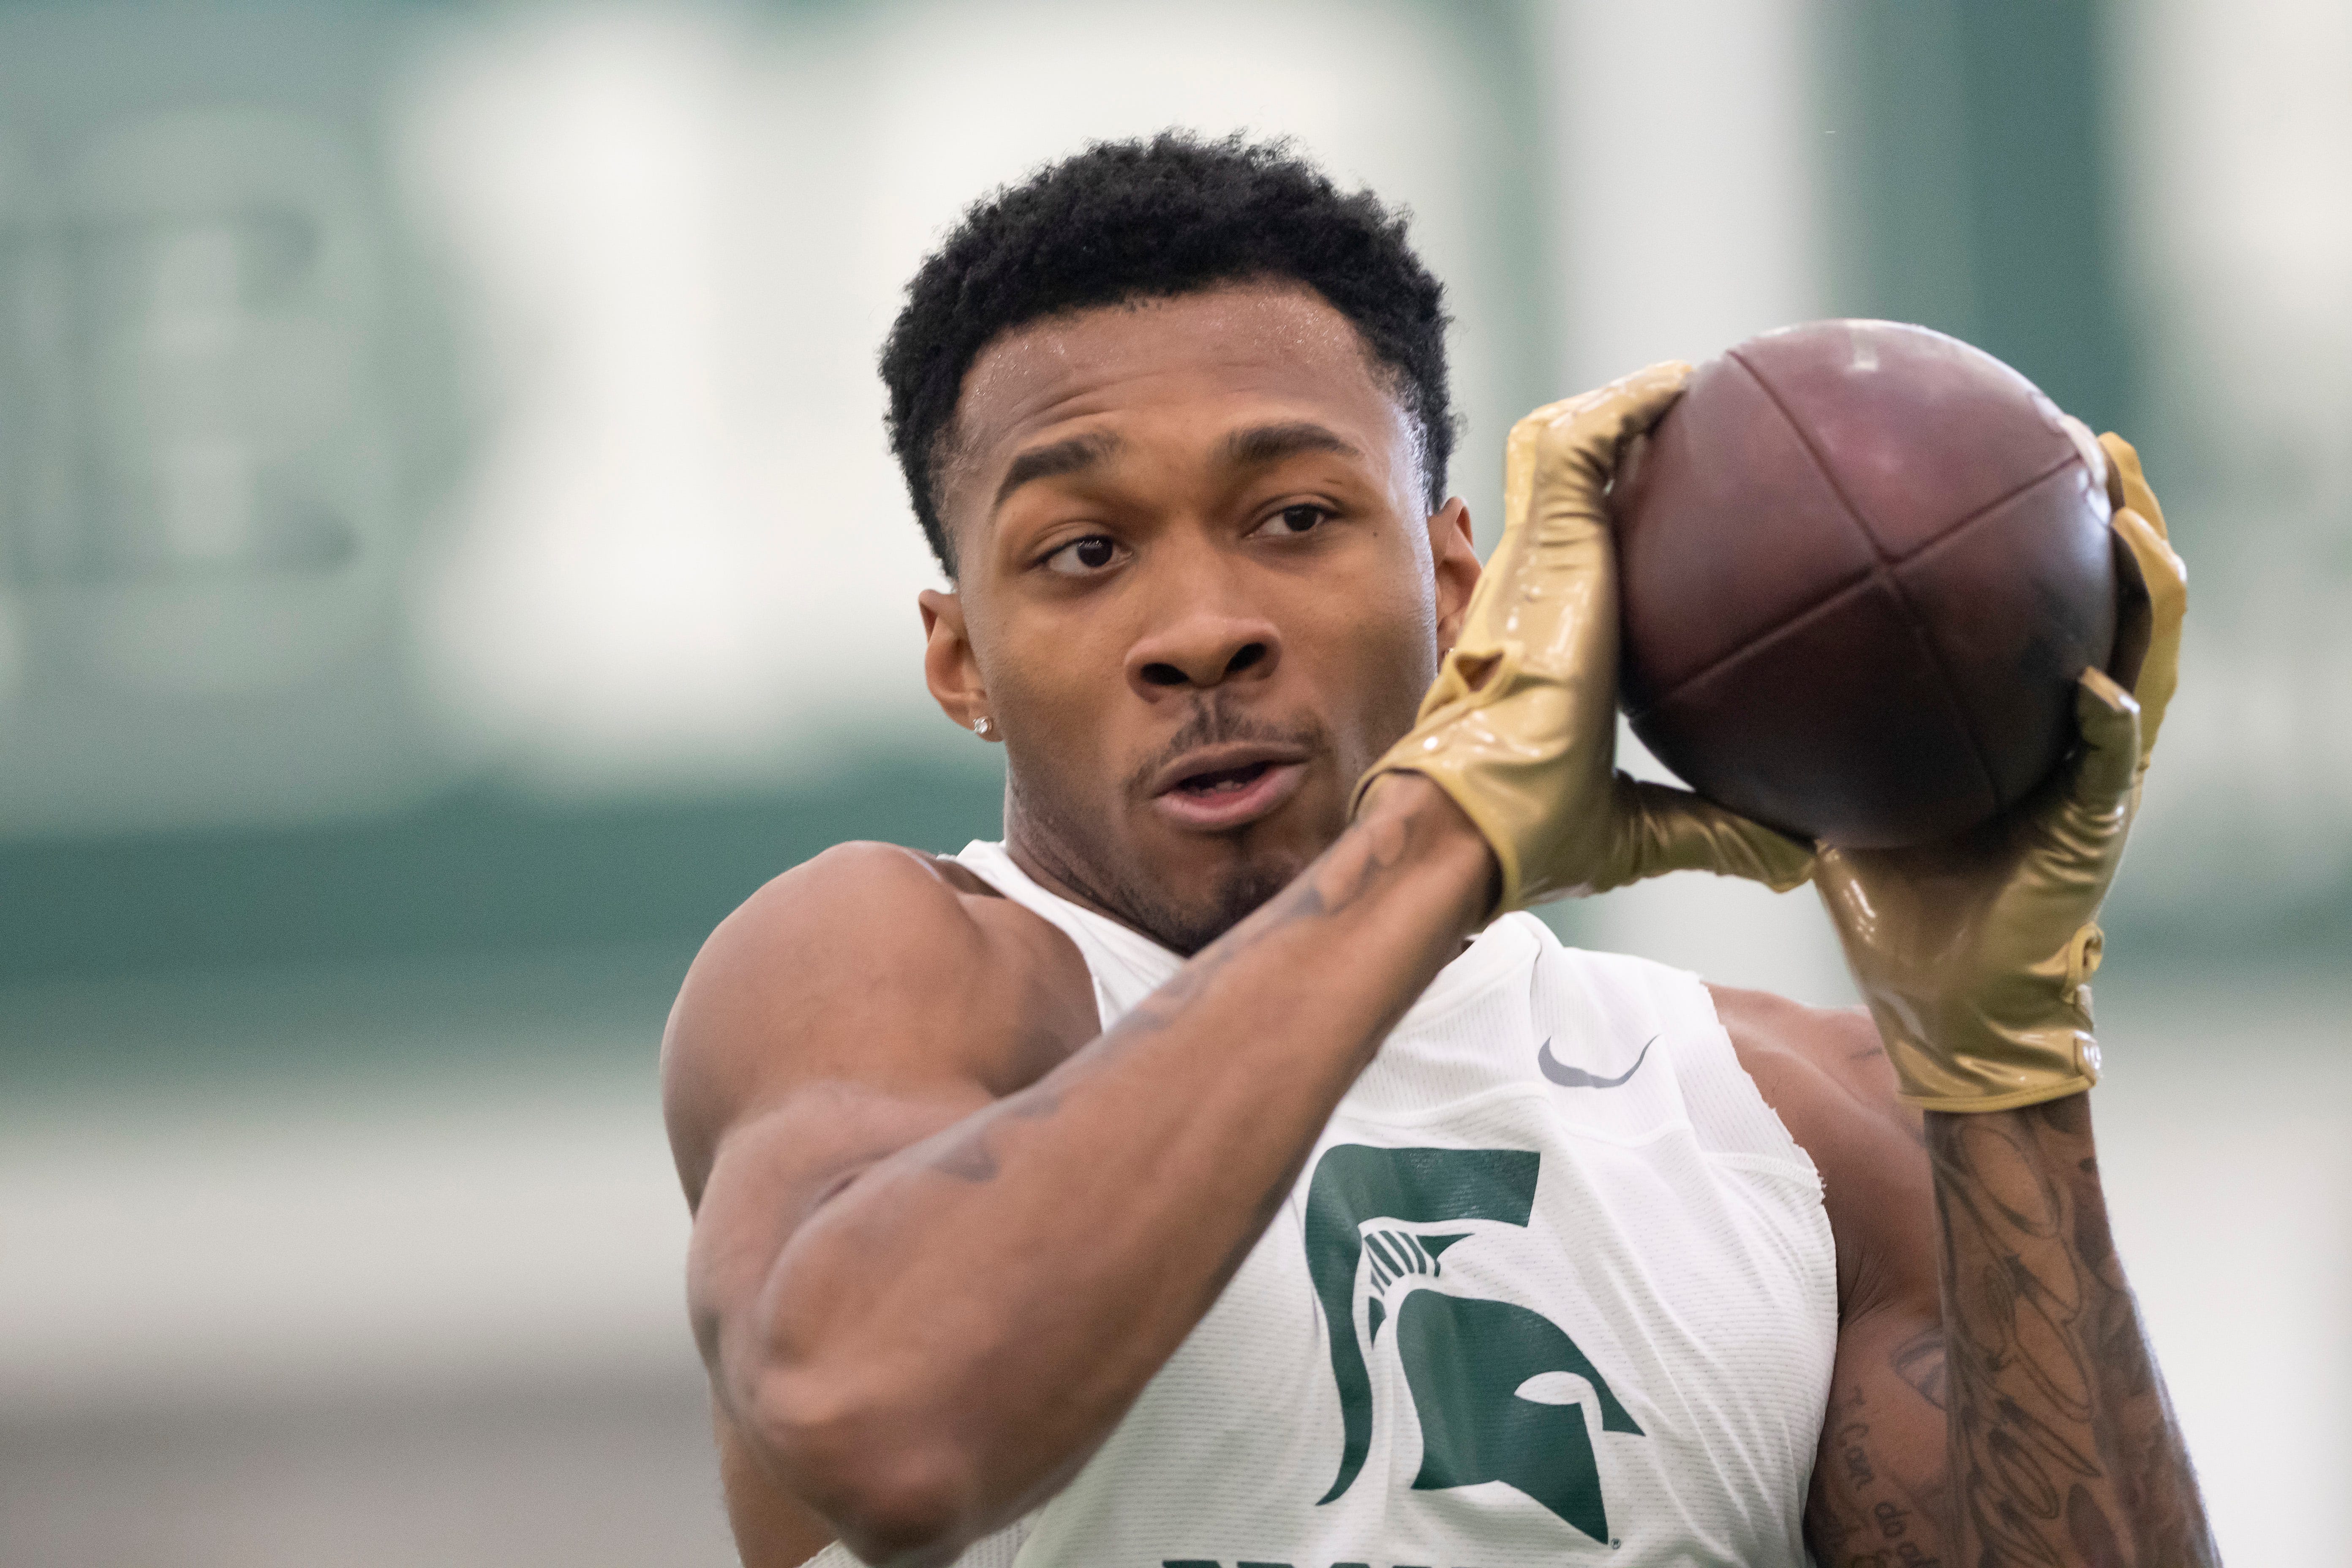 Michigan State cornerback Justin Layne catches a pass during an NFL pro day.